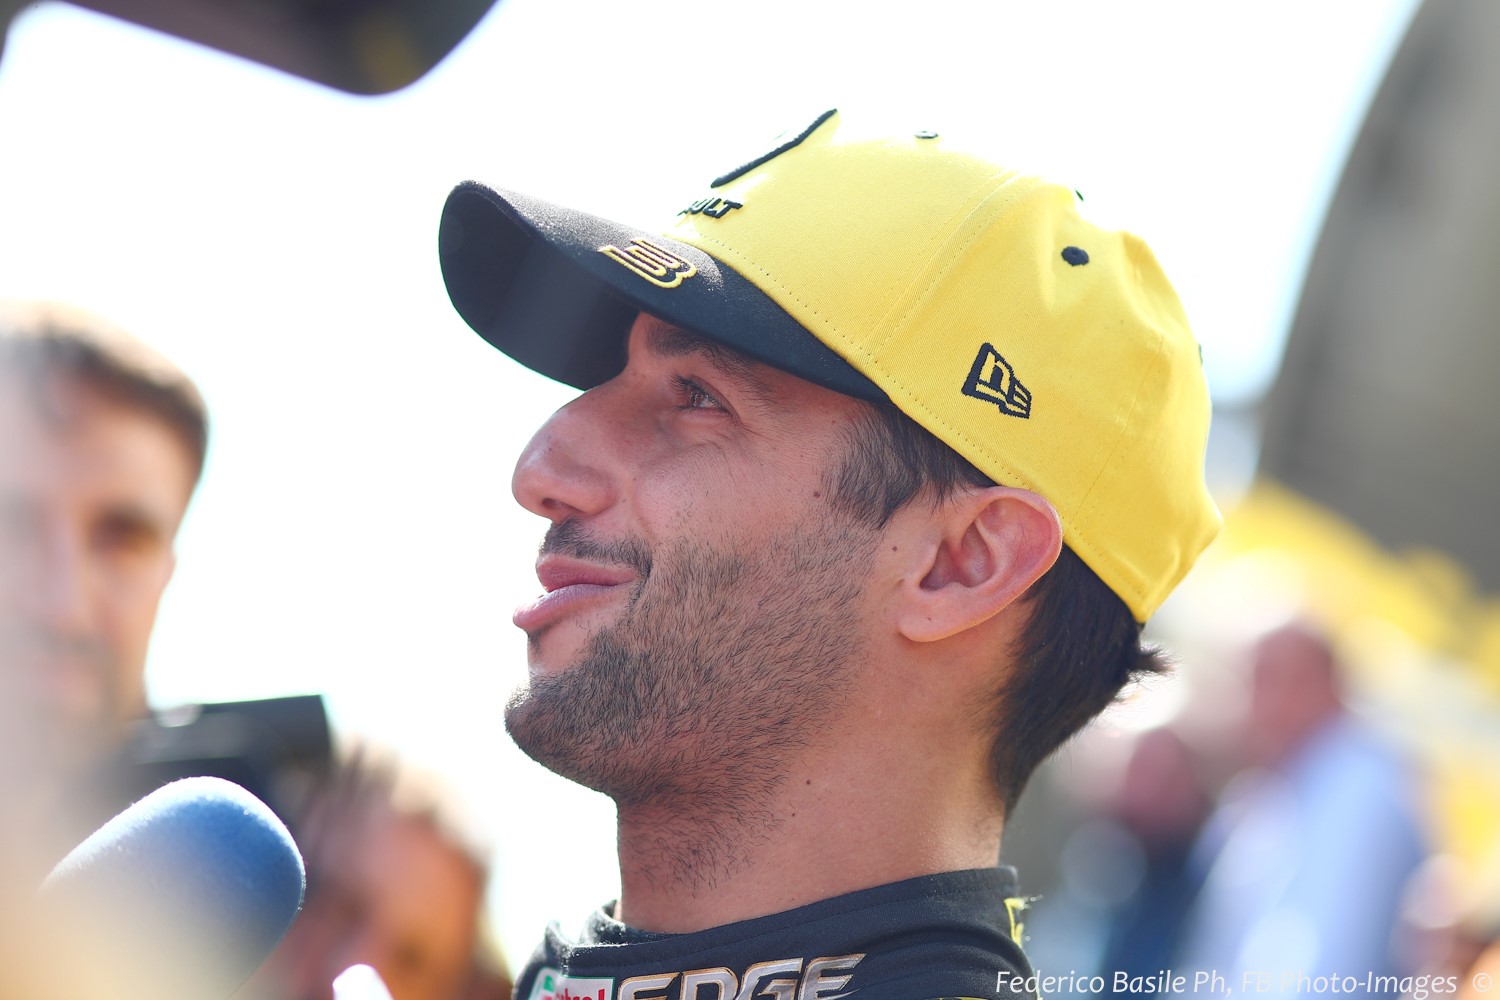 Ricciardo is no where near the highest paid driver in F1, but his salary is more than the entire IndyCar field combined